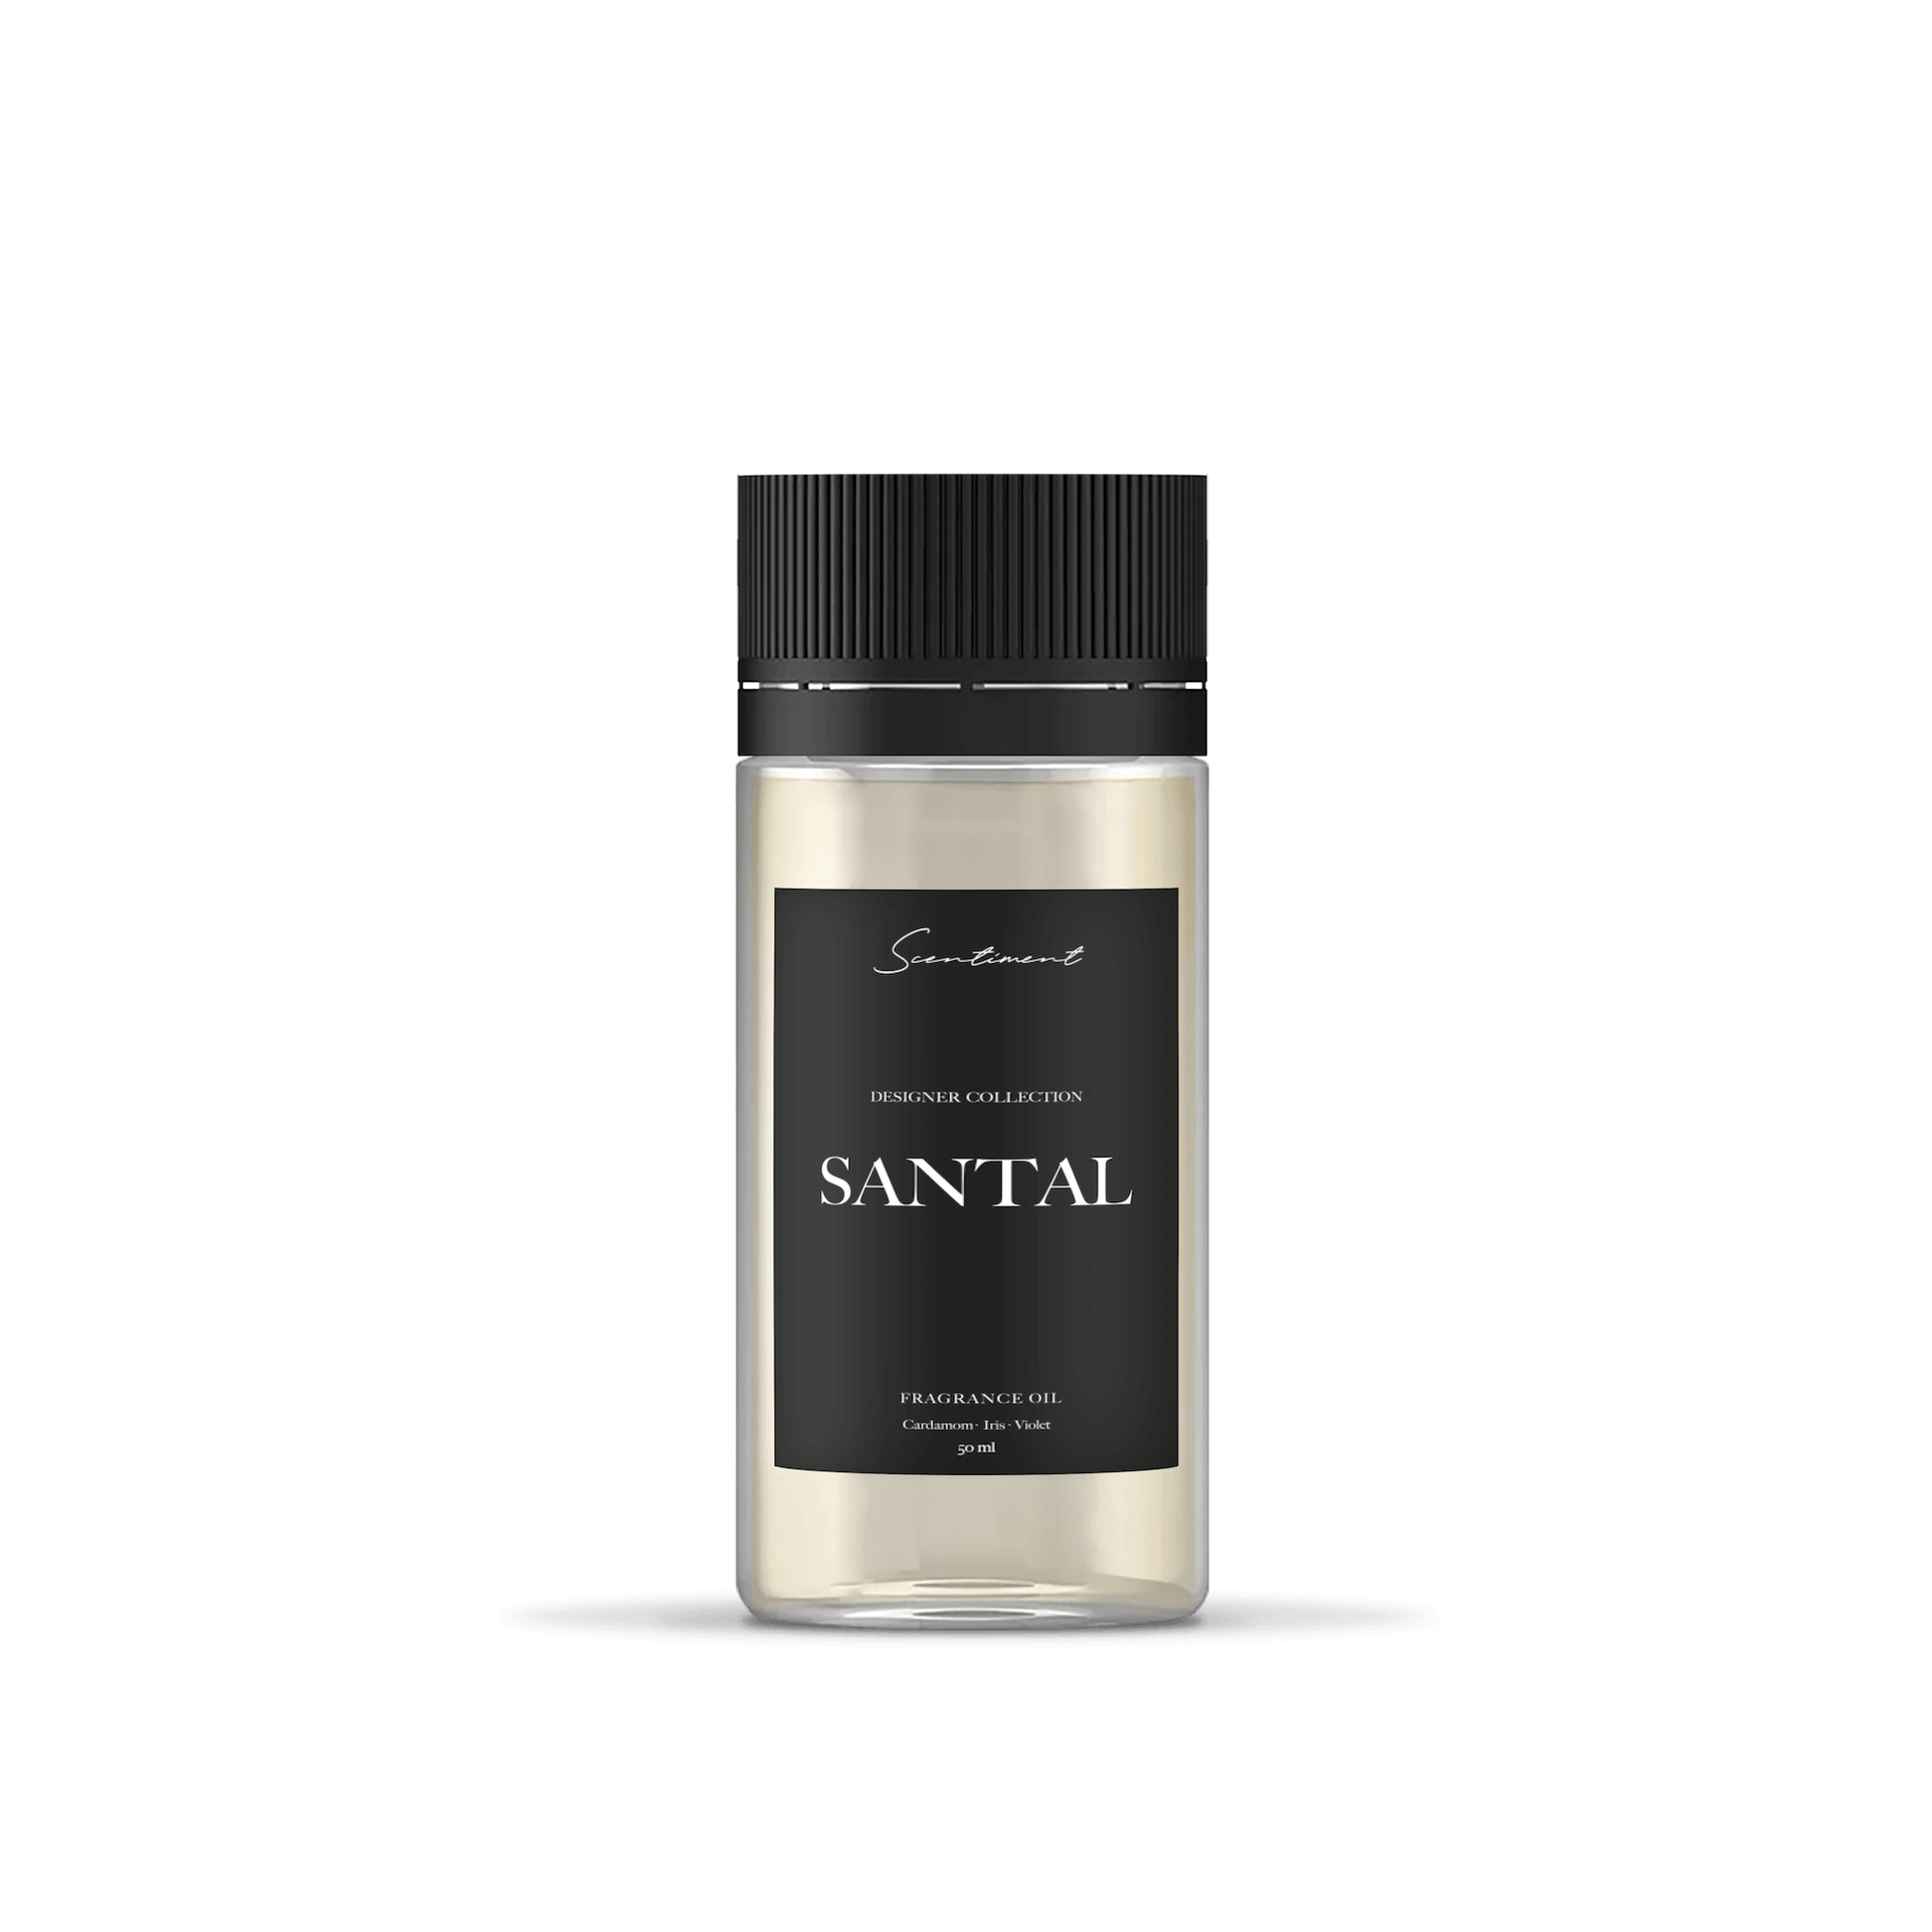 Santal, inspired by Santa 33®, with notes of Cardamom, Iris and Violet.